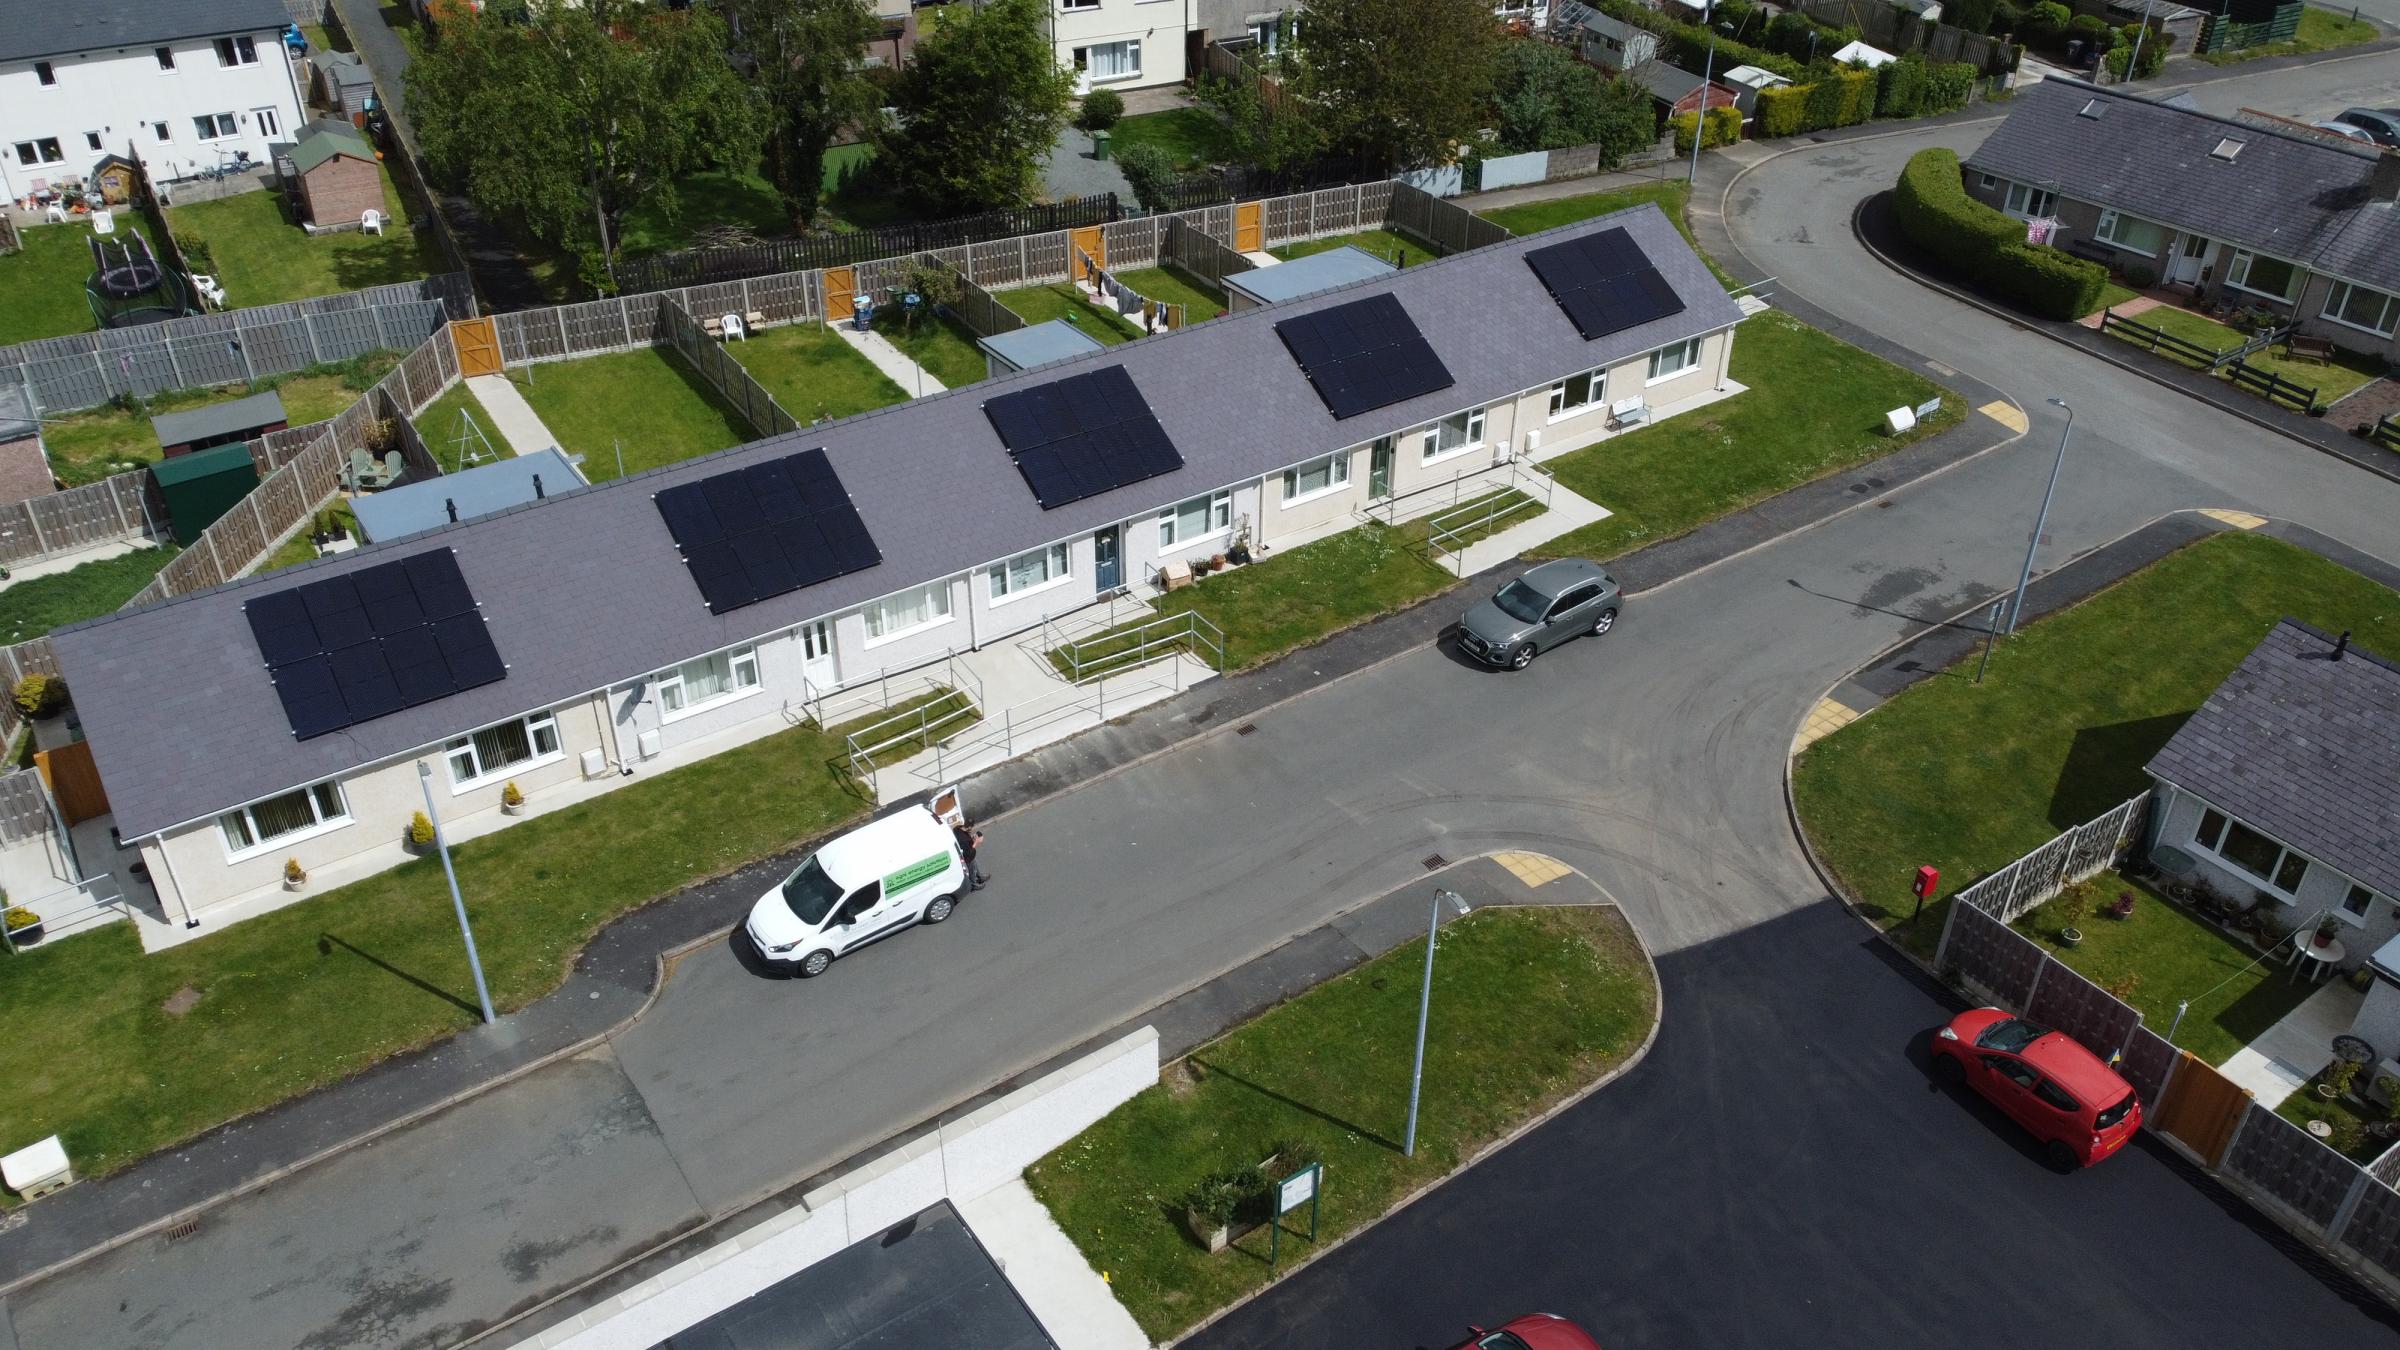 The drone image shows the council house Improvements which include solar panels on the roof of homes at Pont Y Brenin, Llangoed